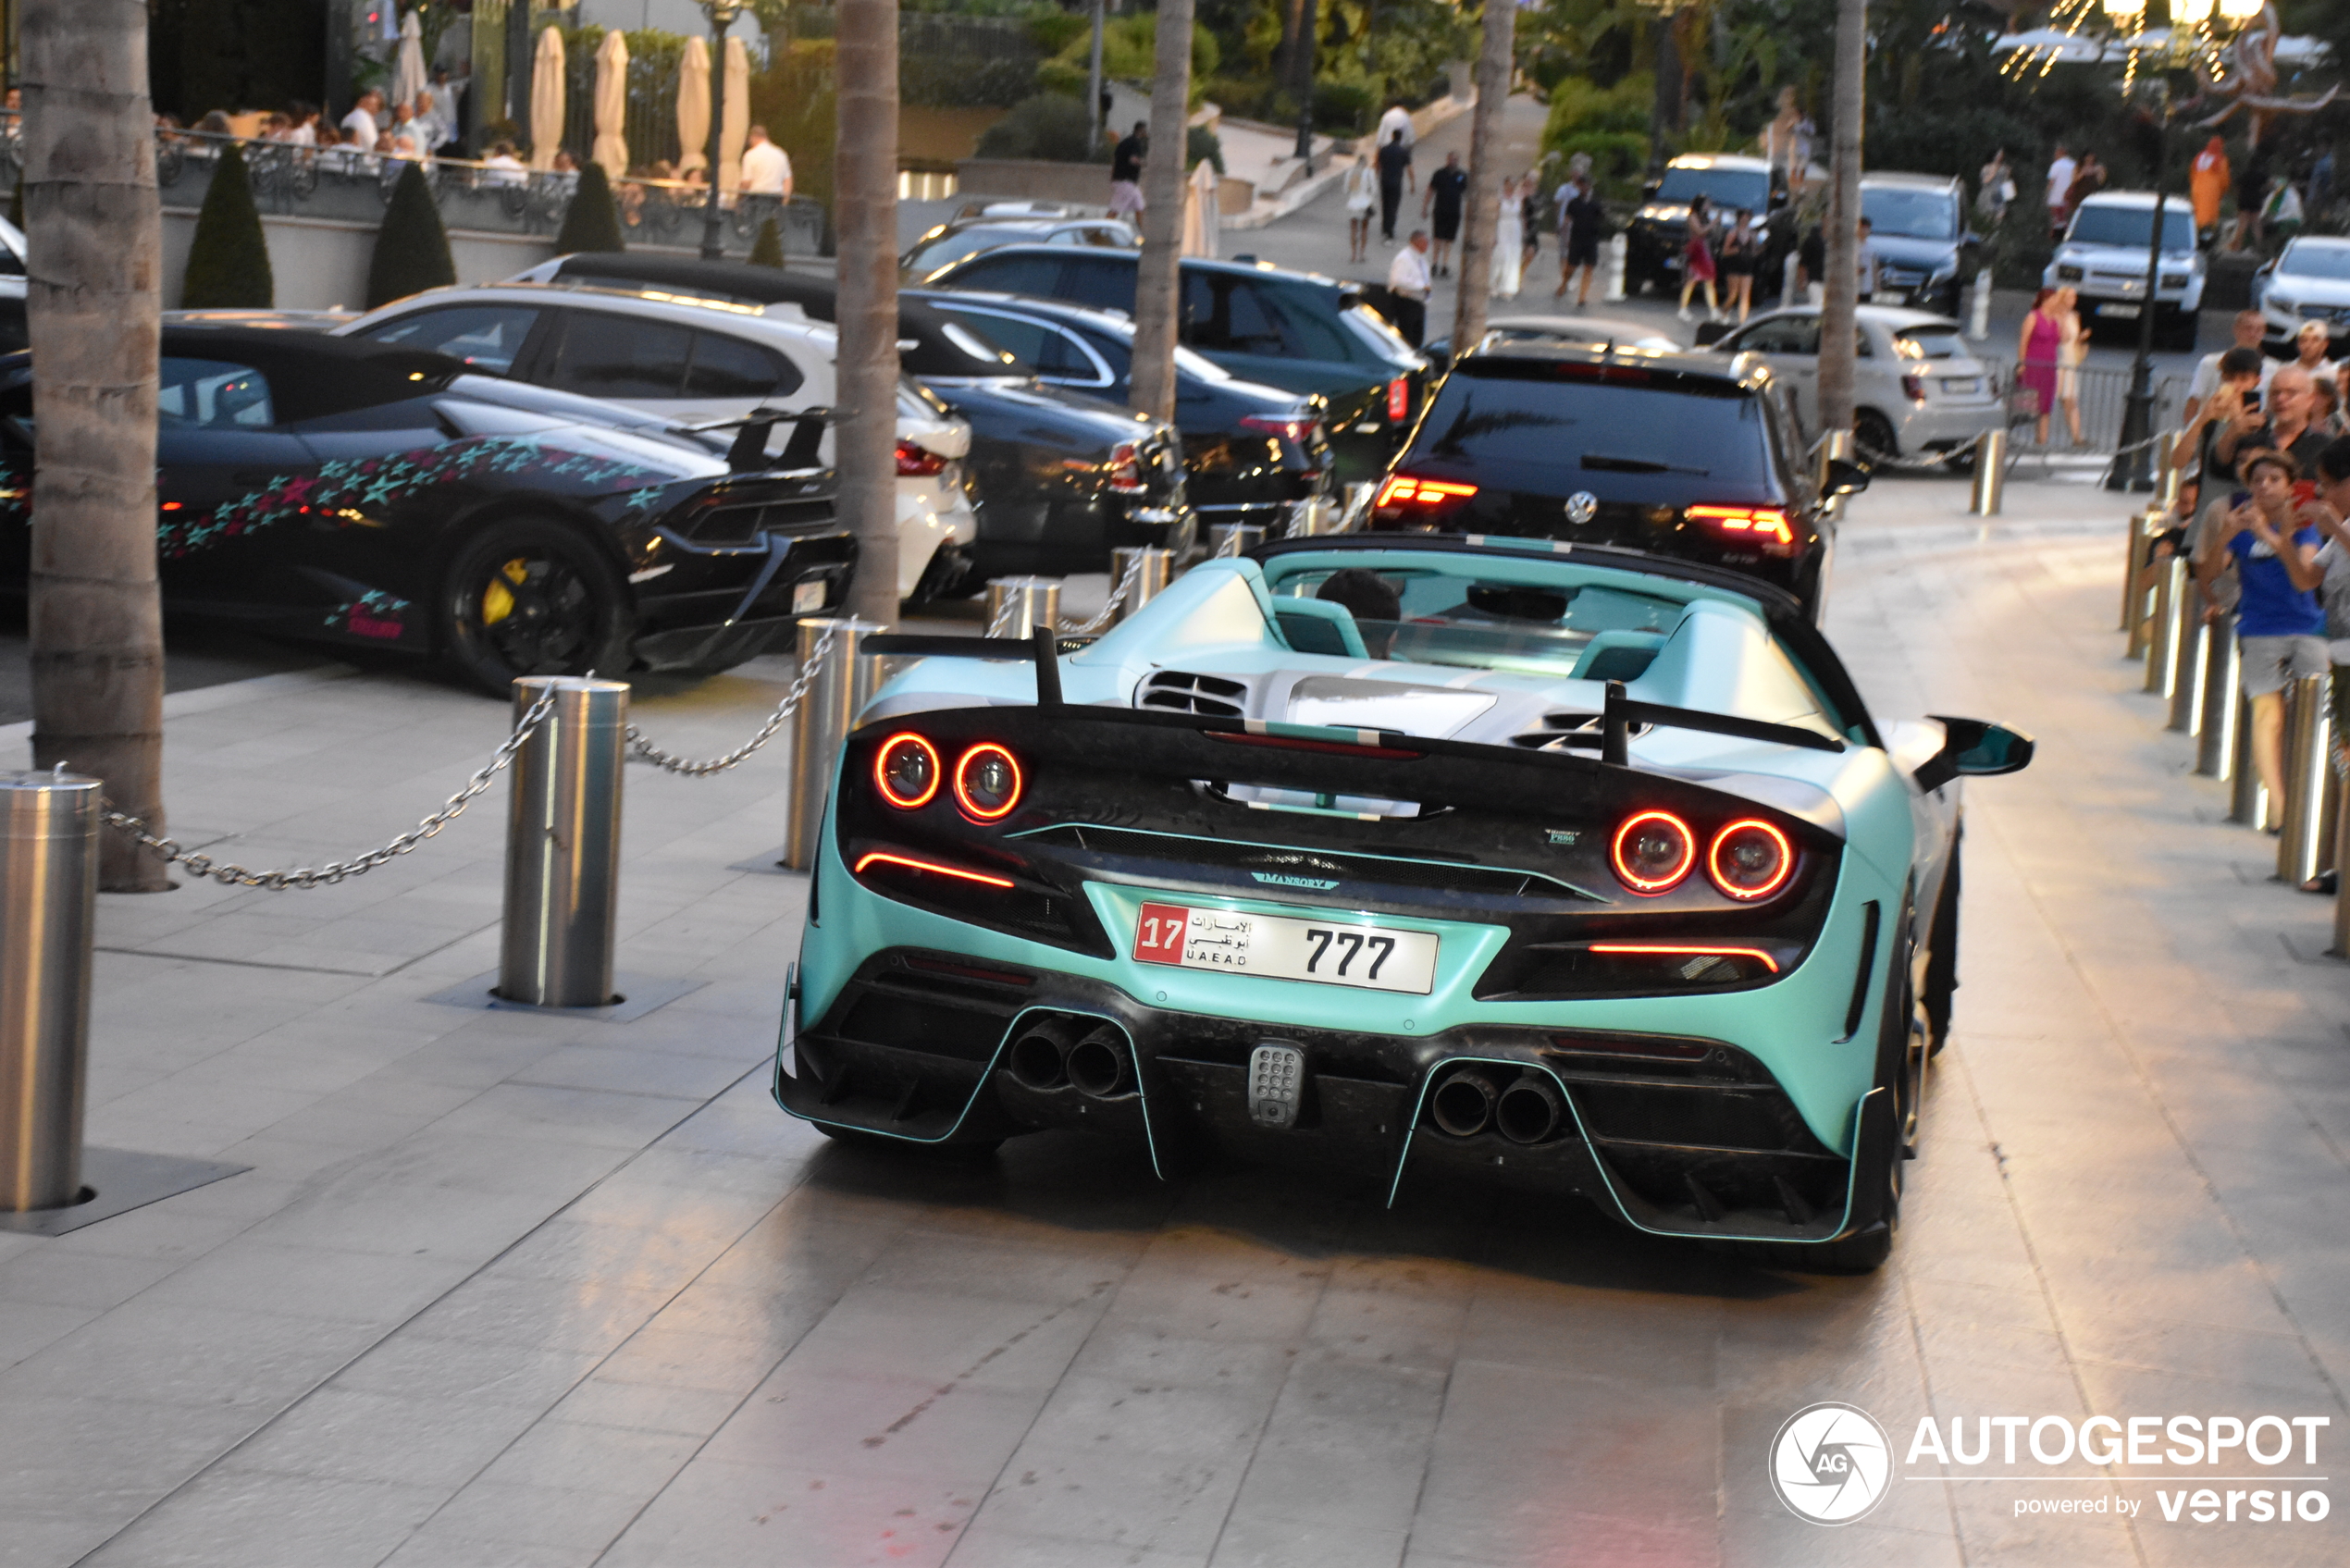 Another Mansory appears for the first time